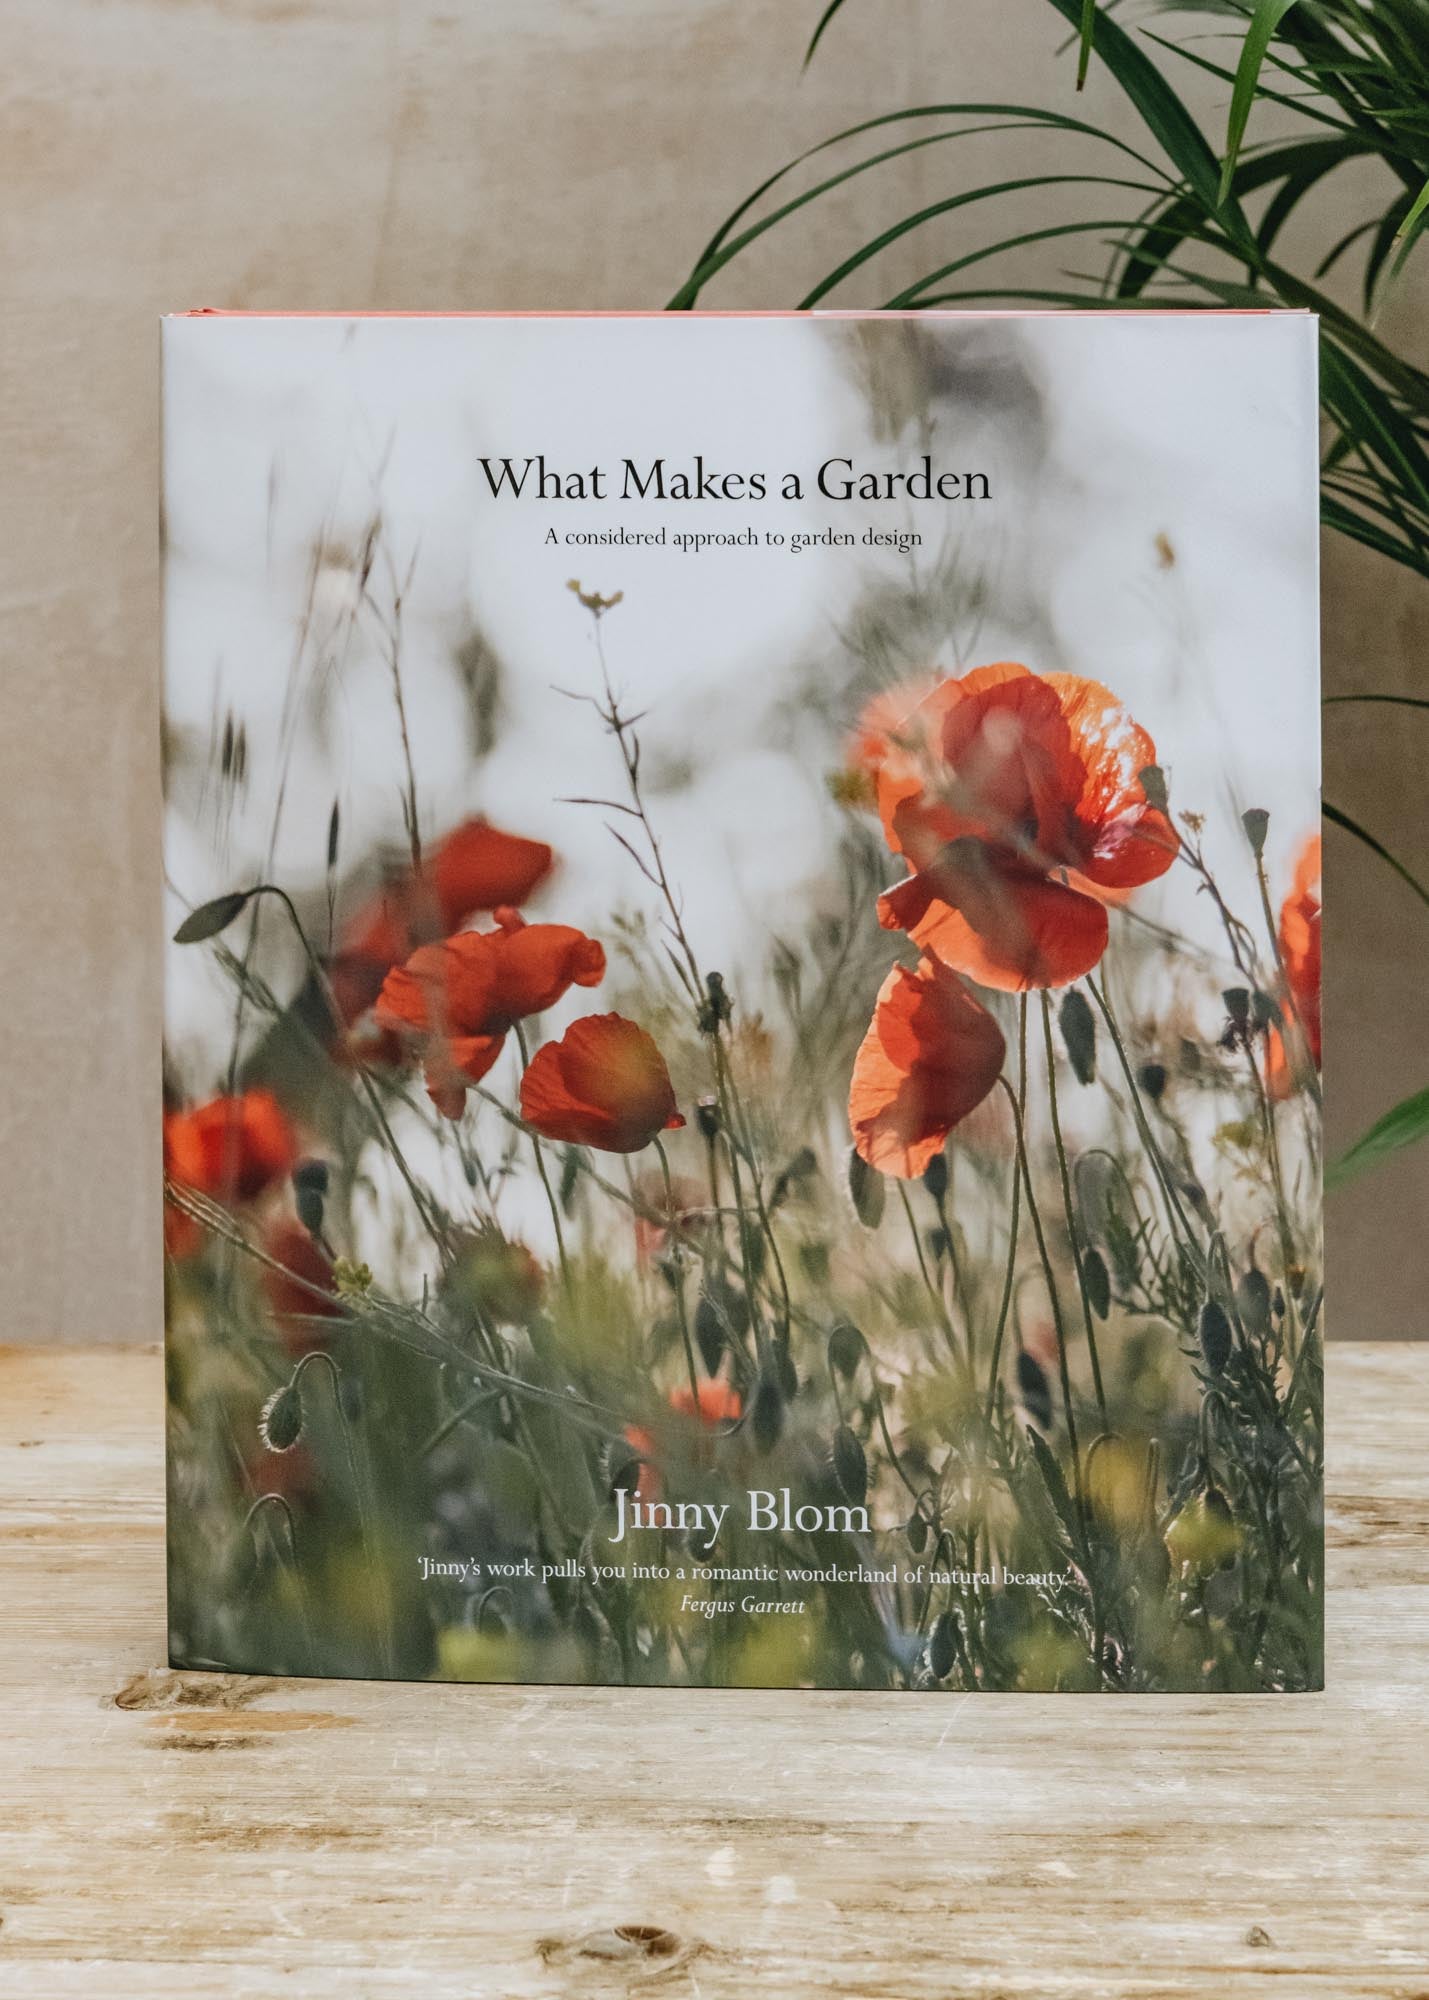 What Makes a Garden: A Considered Approach to Garden Design by Jinny Blom